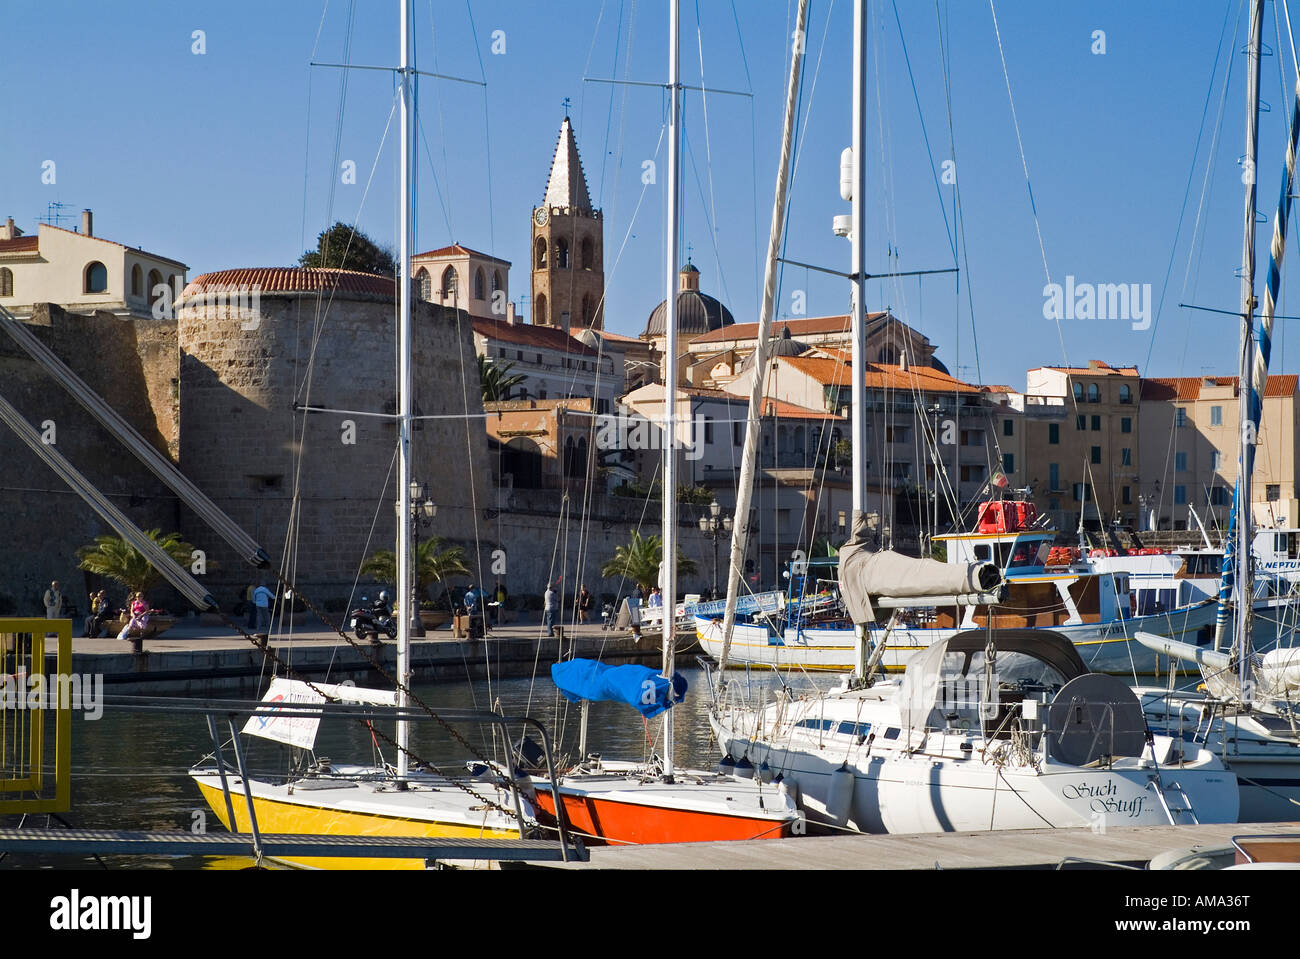 dh Harbour ALGHERO SARDINIA Boats at quayside harbour walls Santa Maria cathedral belltower sailing Stock Photo